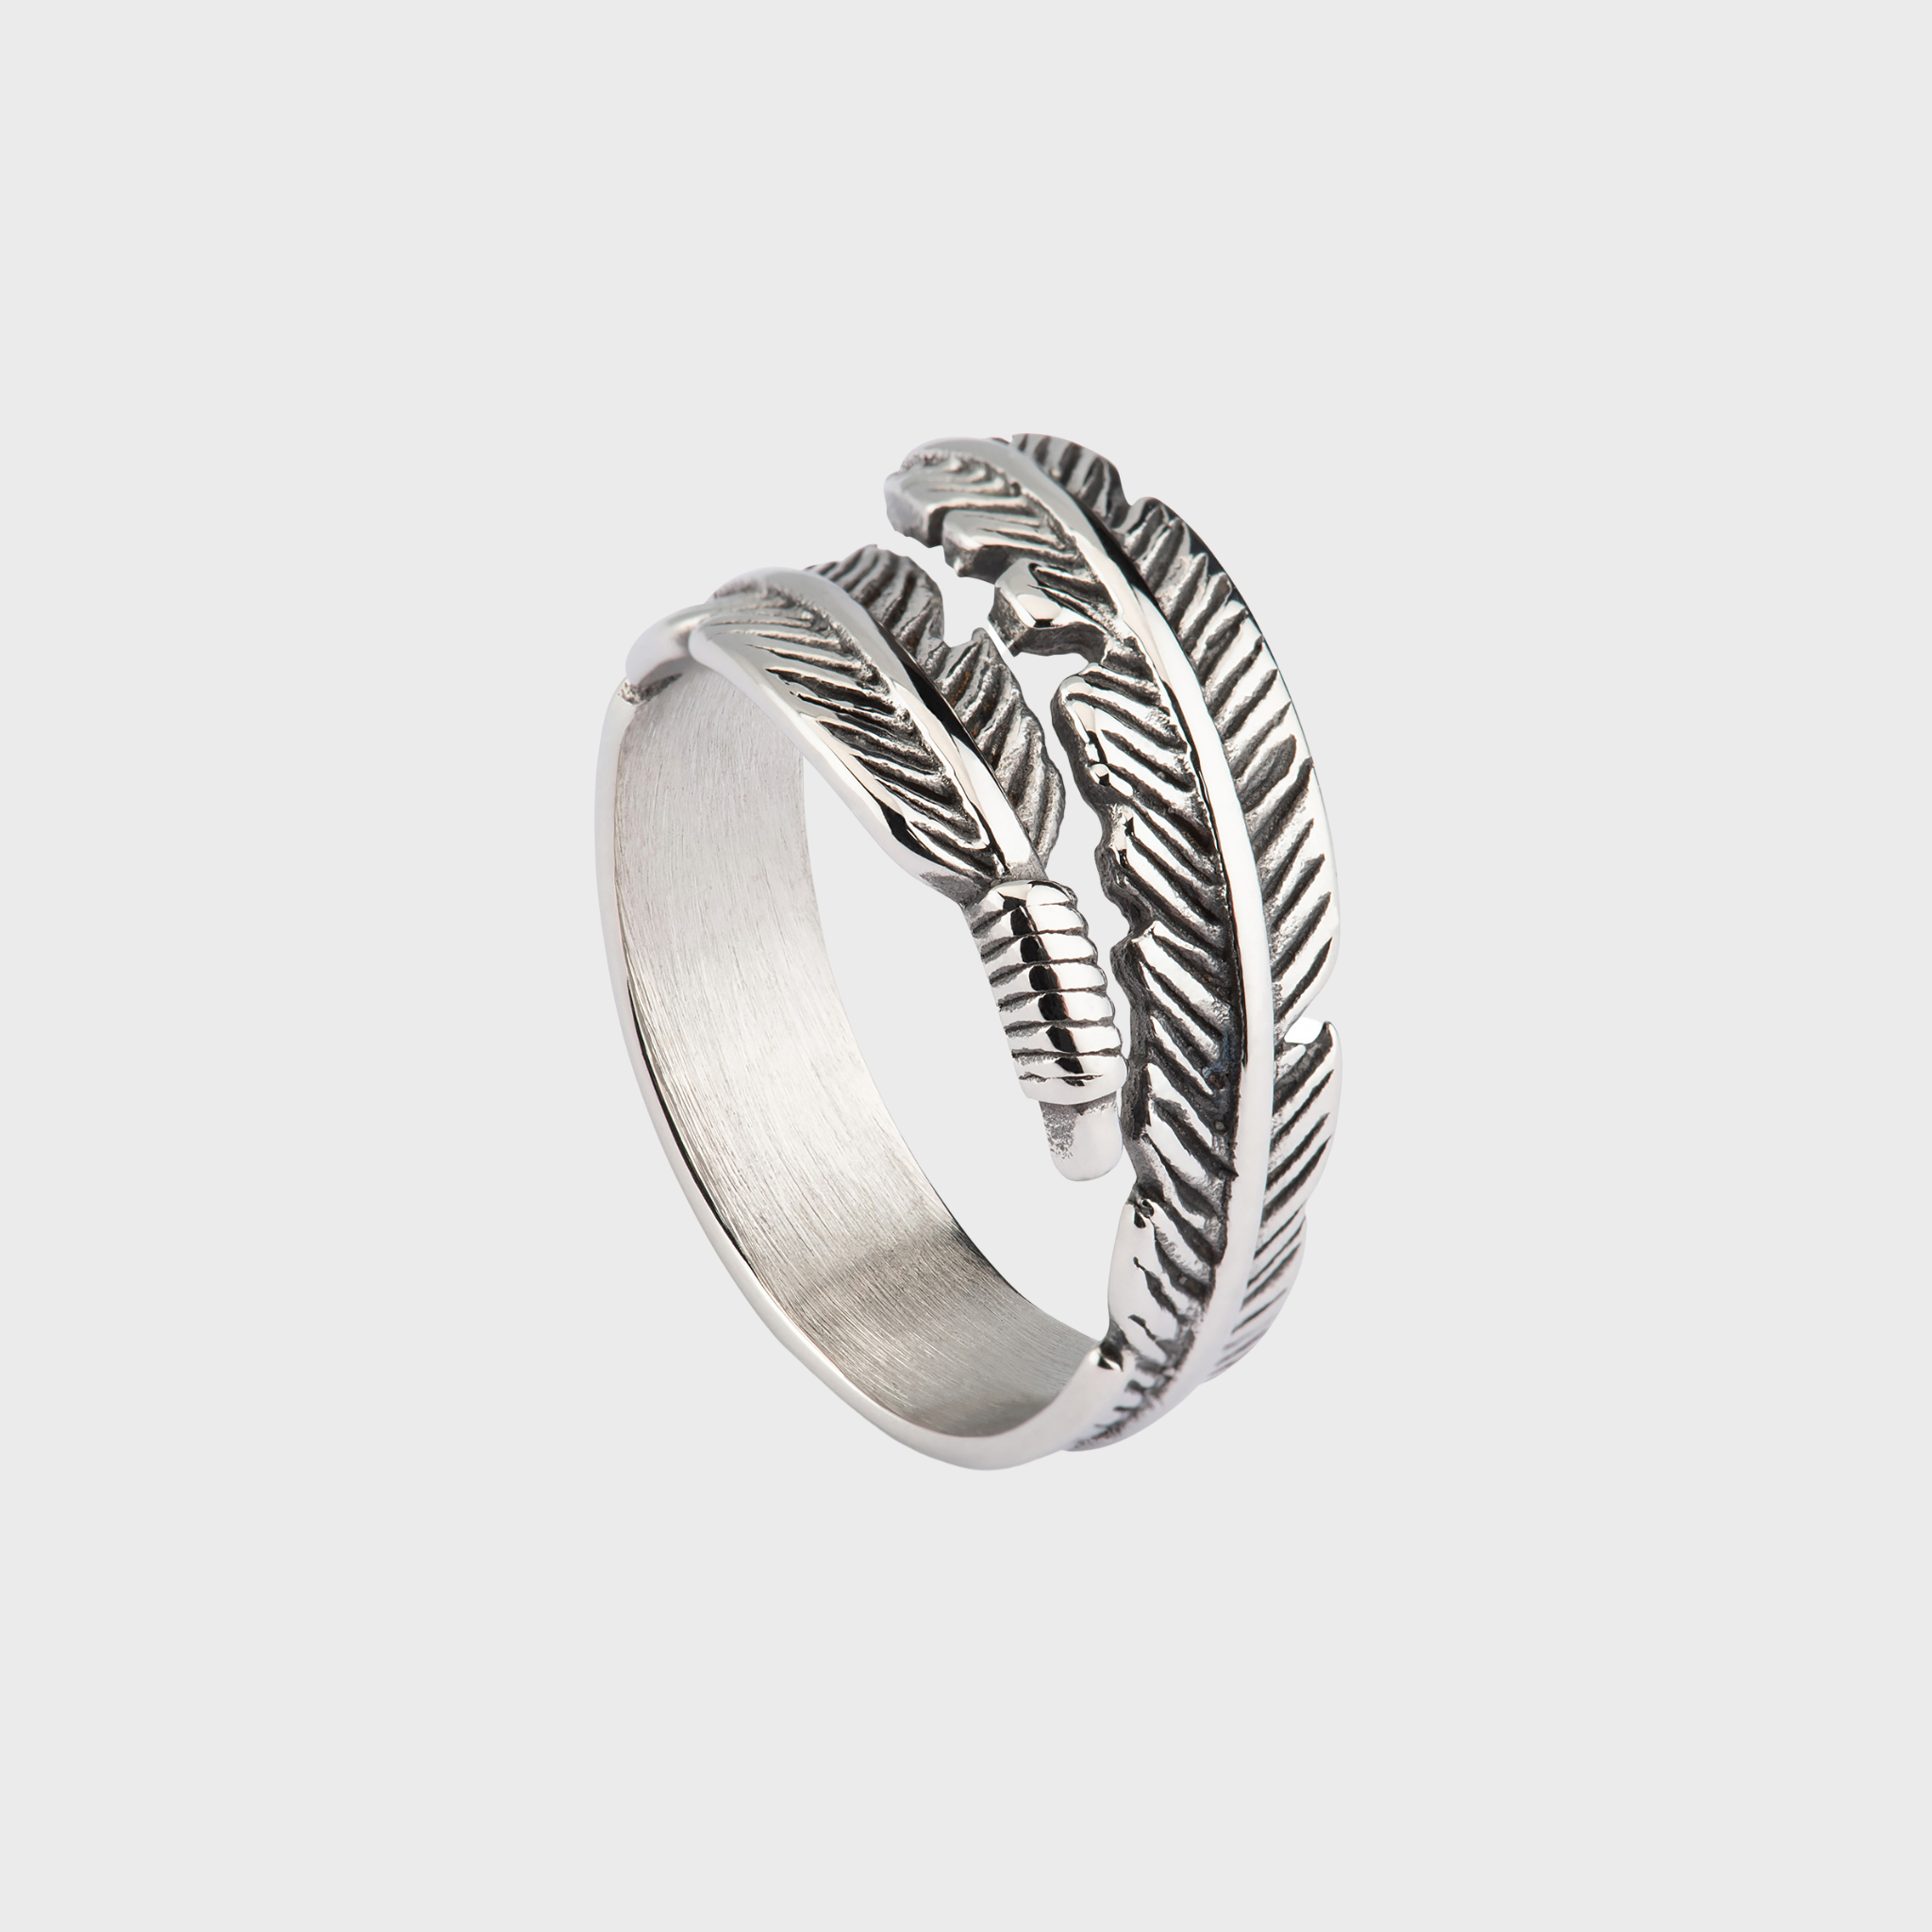 Premium 316L Stainless Steel Feather style ring